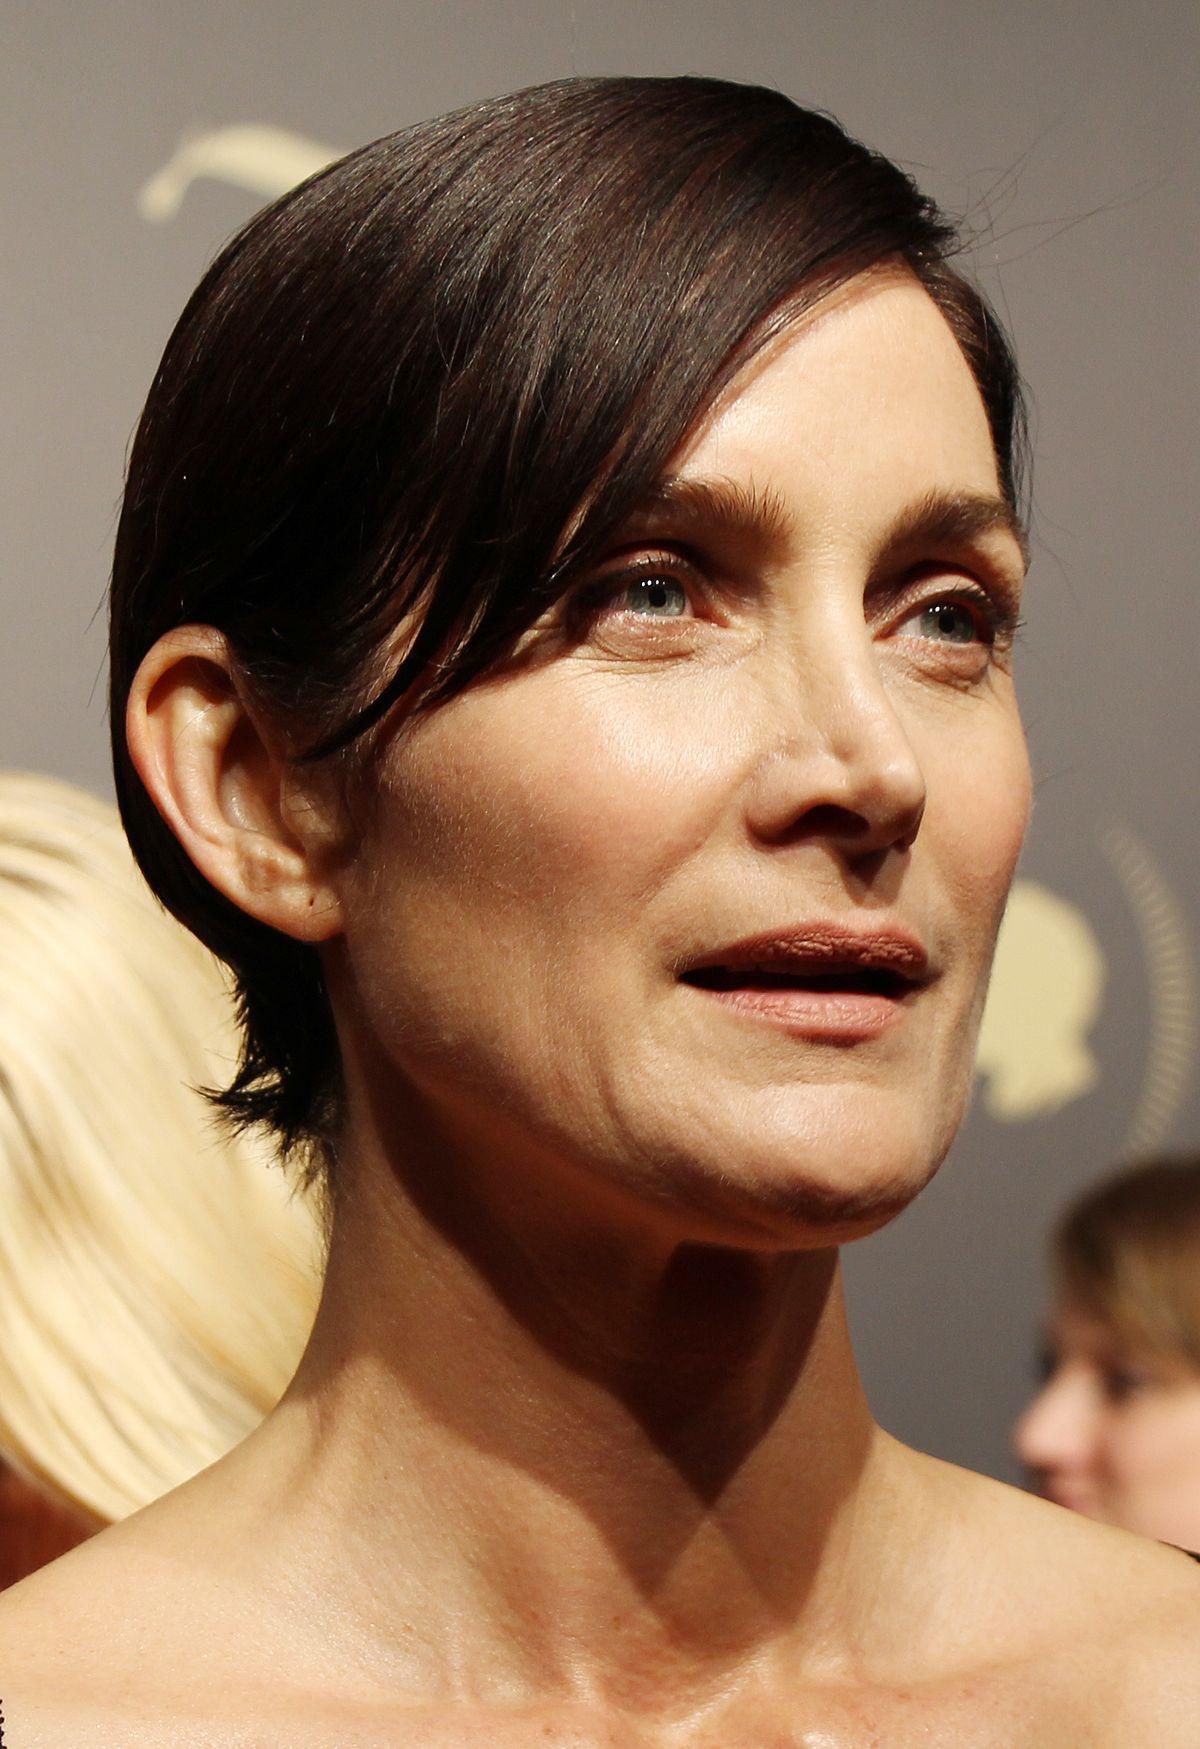 60+ Hottest Carrie-Anne Moss Boobs Pictures Will Make You Fall In Love Like Crazy 252